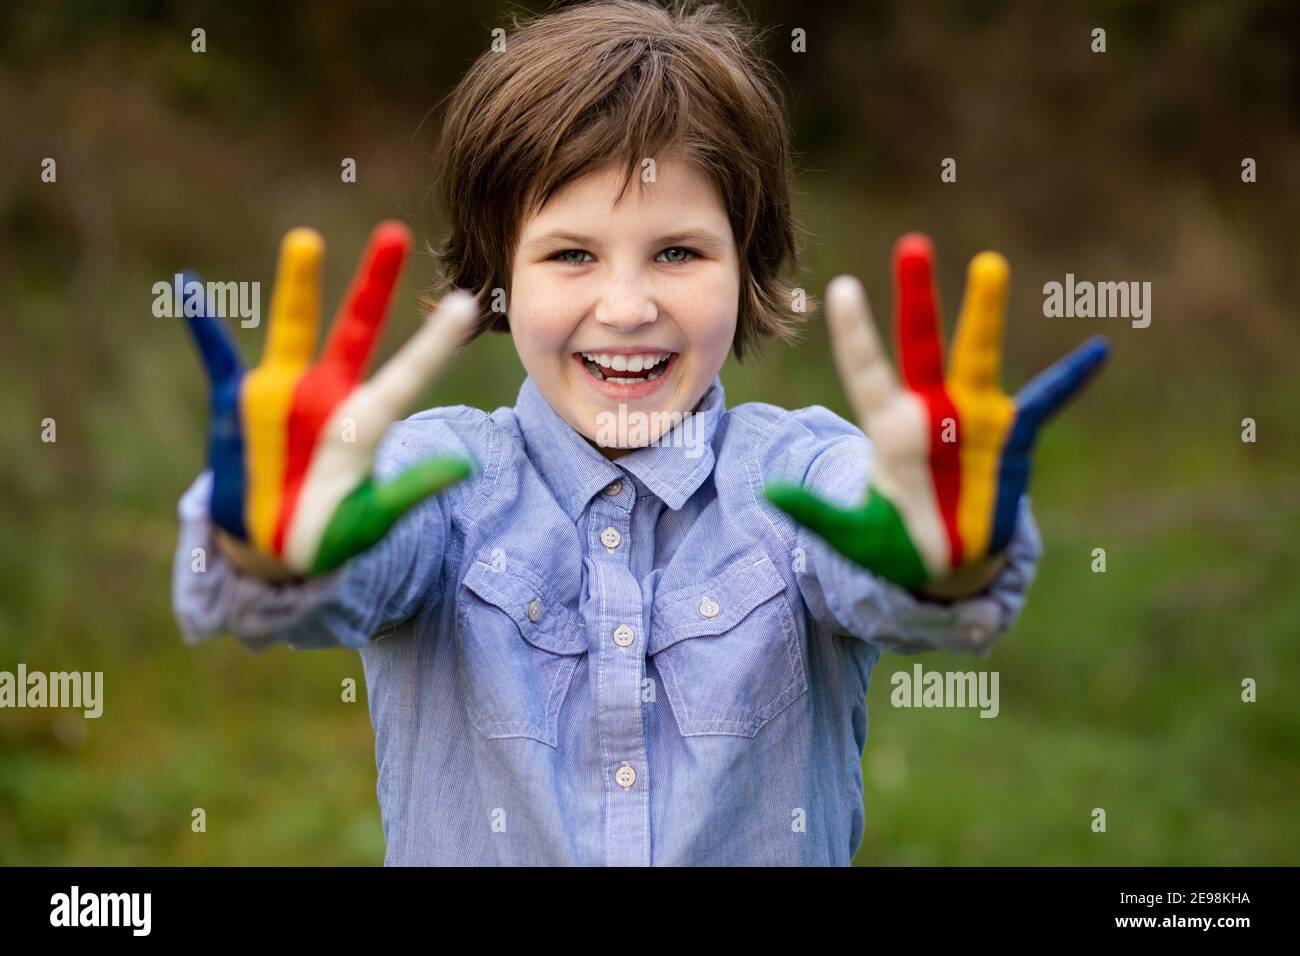 Outdoor portrait of cheerful kid girl show hello gesture with hands painted in Seychelles flag colors Stock Photo